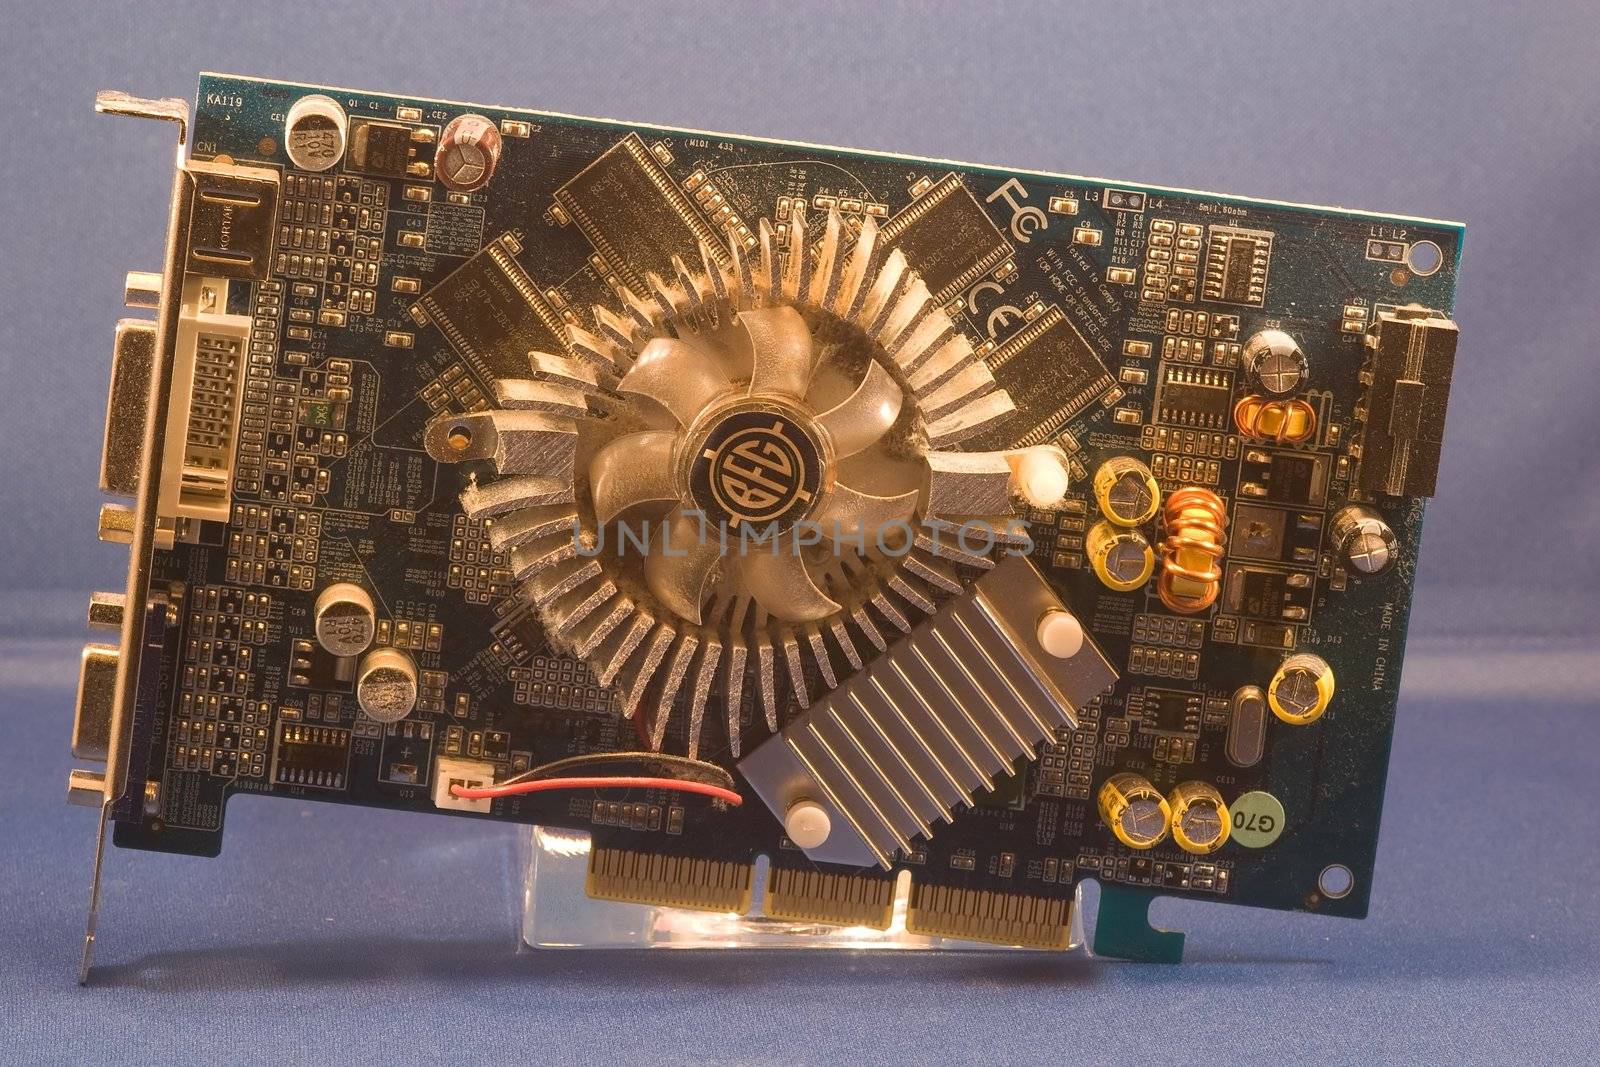 A video card, also referred to as a graphics accelerator card, display adapter, graphics card, and numerous other terms, is an item of personal computer hardware whose function is to generate and output images to a display.